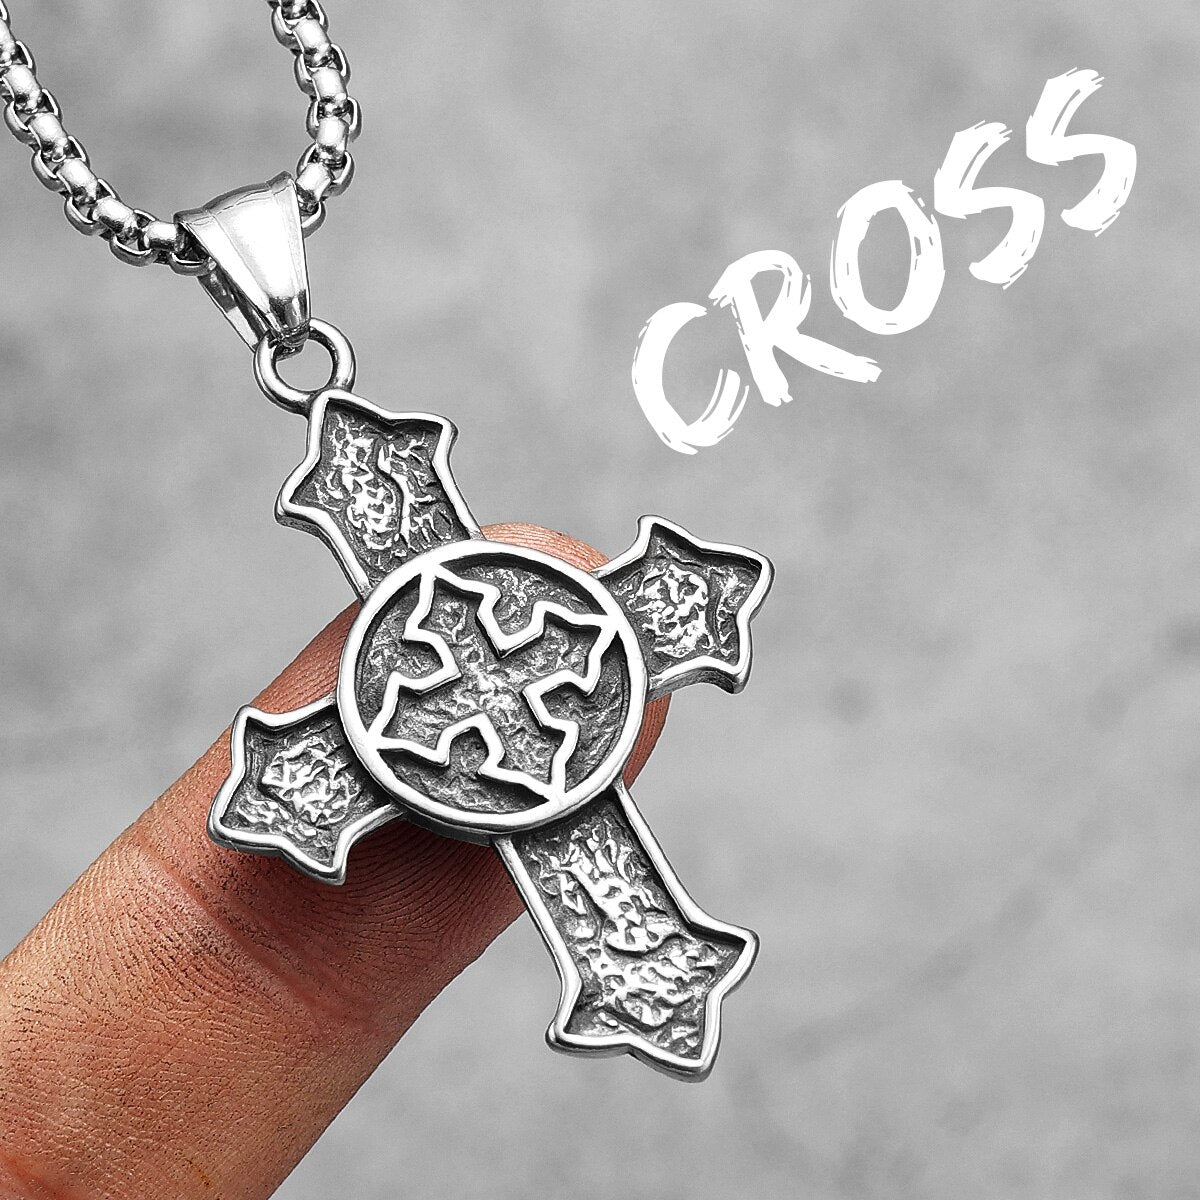 Religion Cross Amulet Stainless Steel Men Women Necklaces Pendants Chain Gothic Punk Trendy Jewelry Creativity Gift N654-Cross